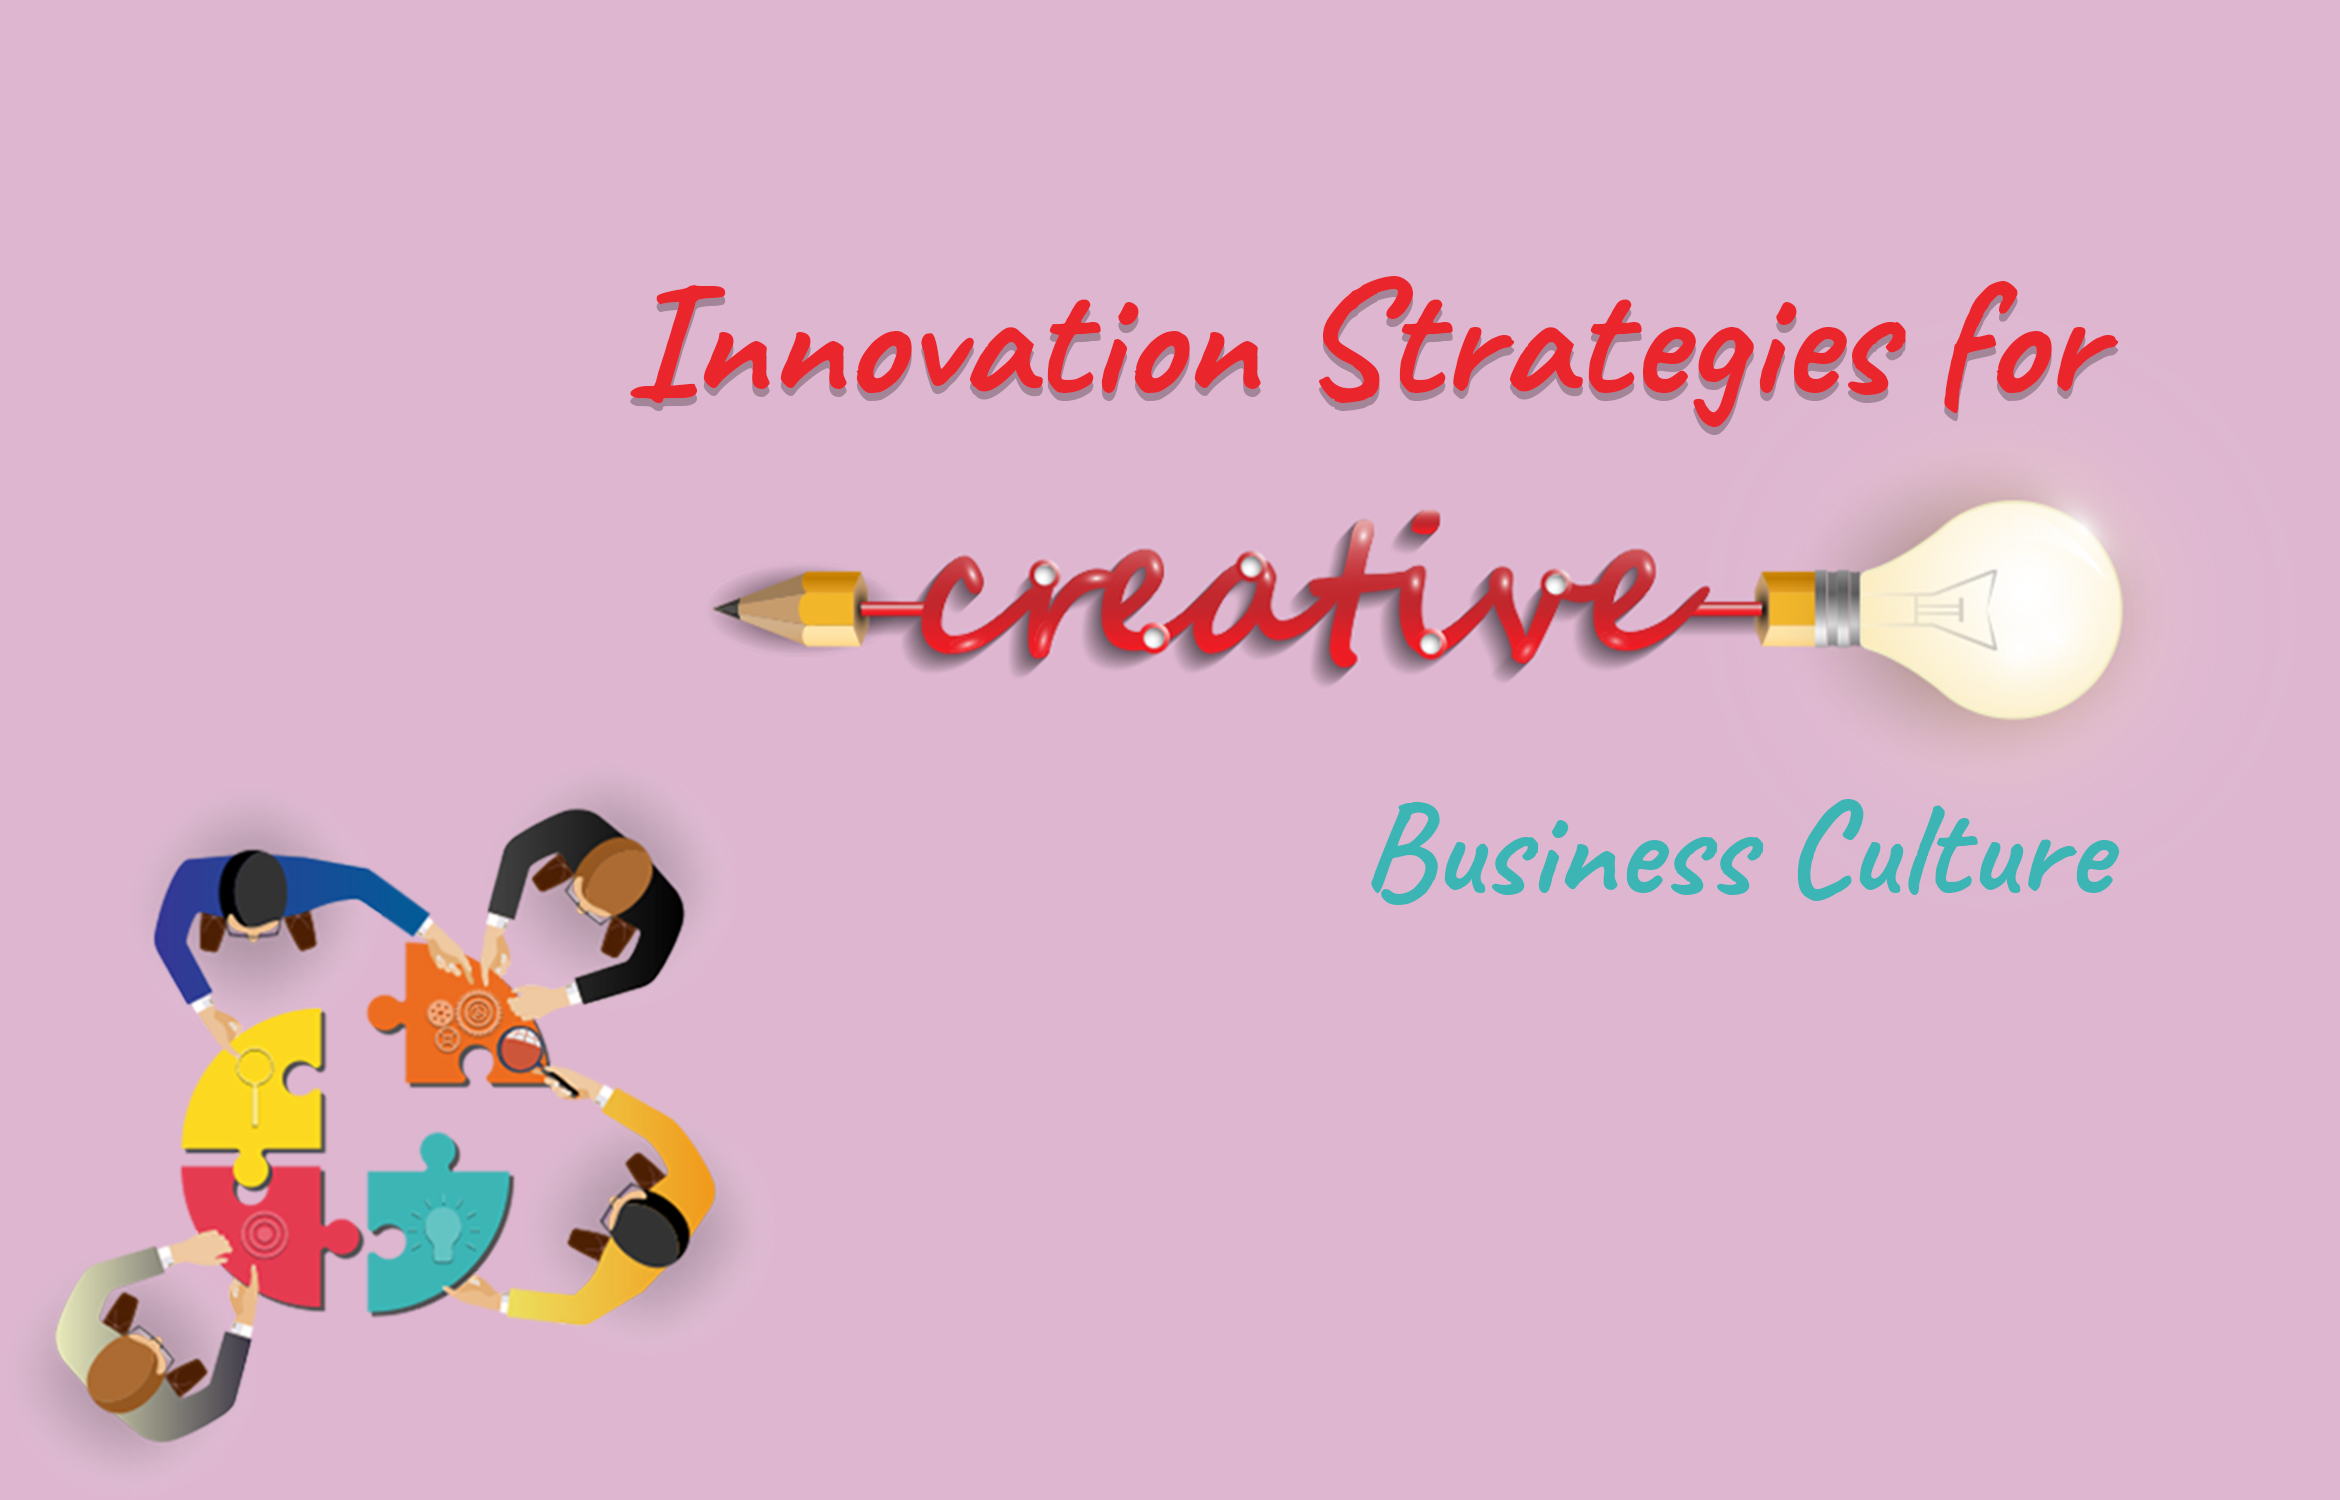 Innovation Strategies for a Creative Business Culture